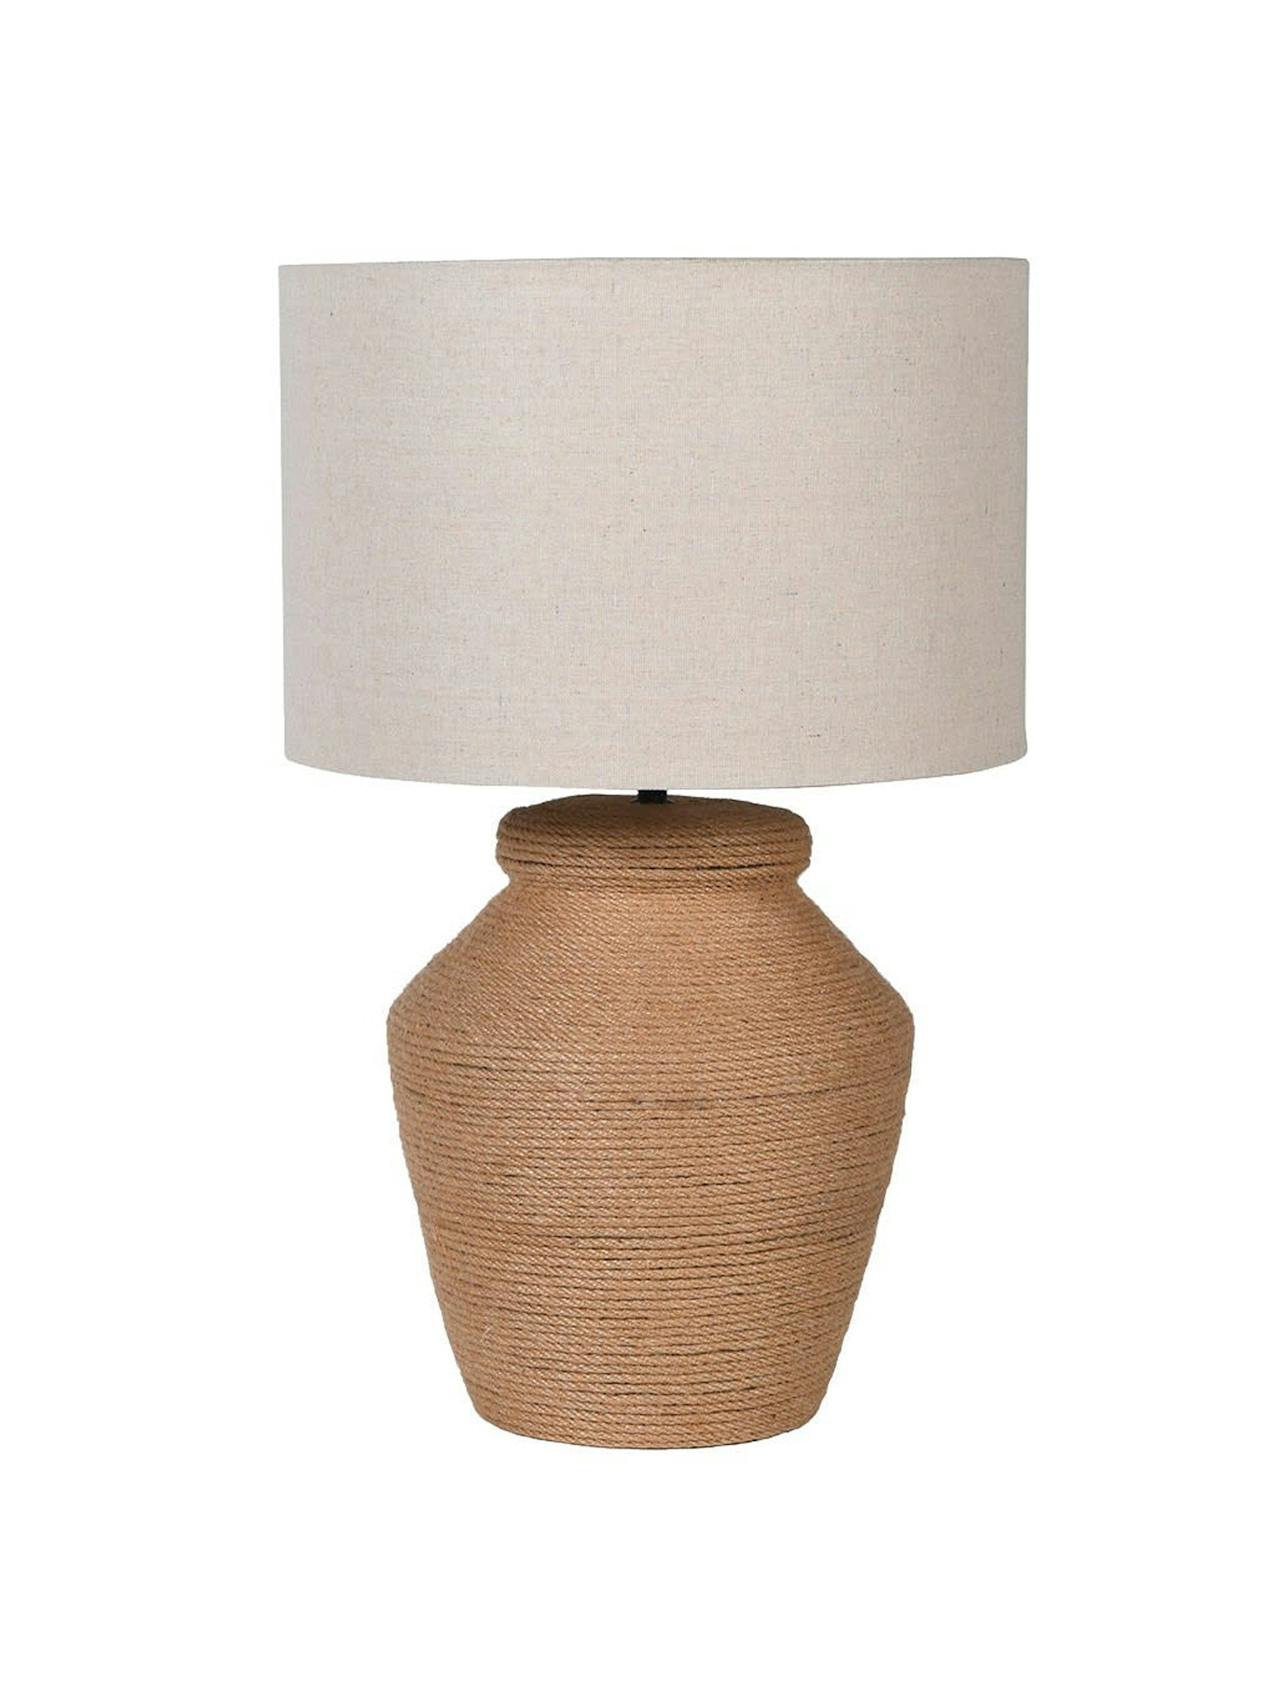 Rope table lamp with linen shade